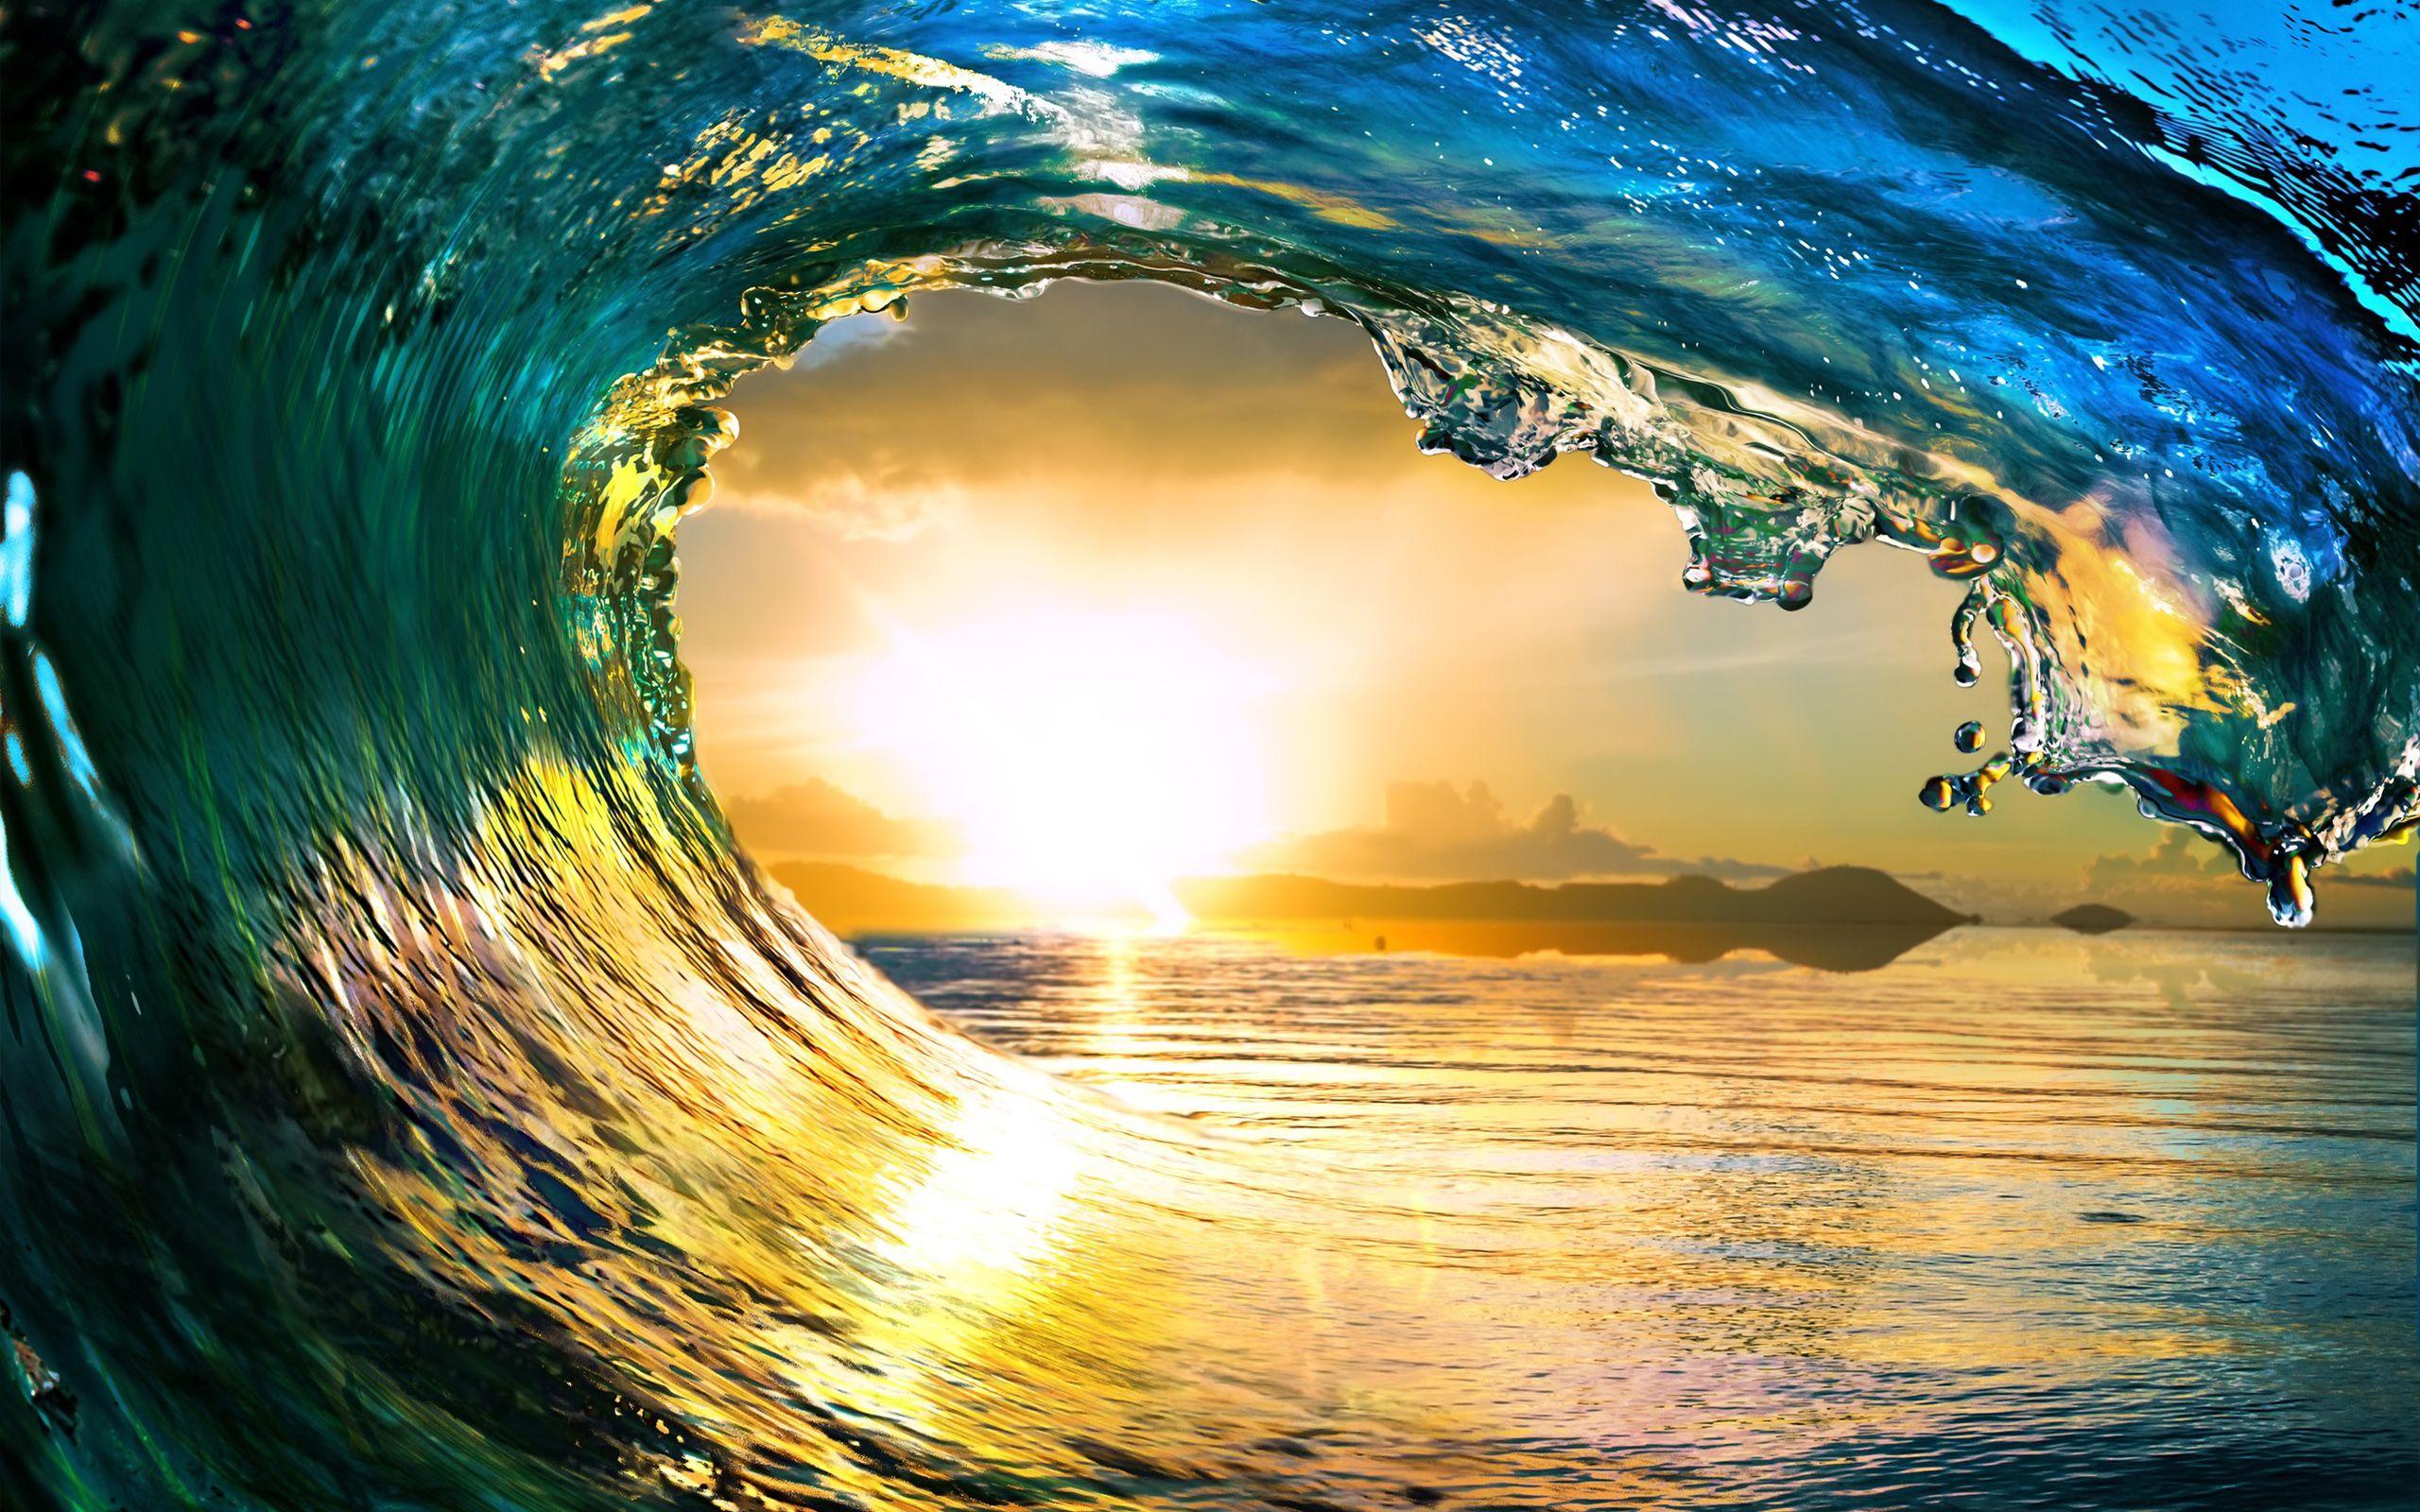 The Perfect Sunset Wave Wallpaper free desktop background